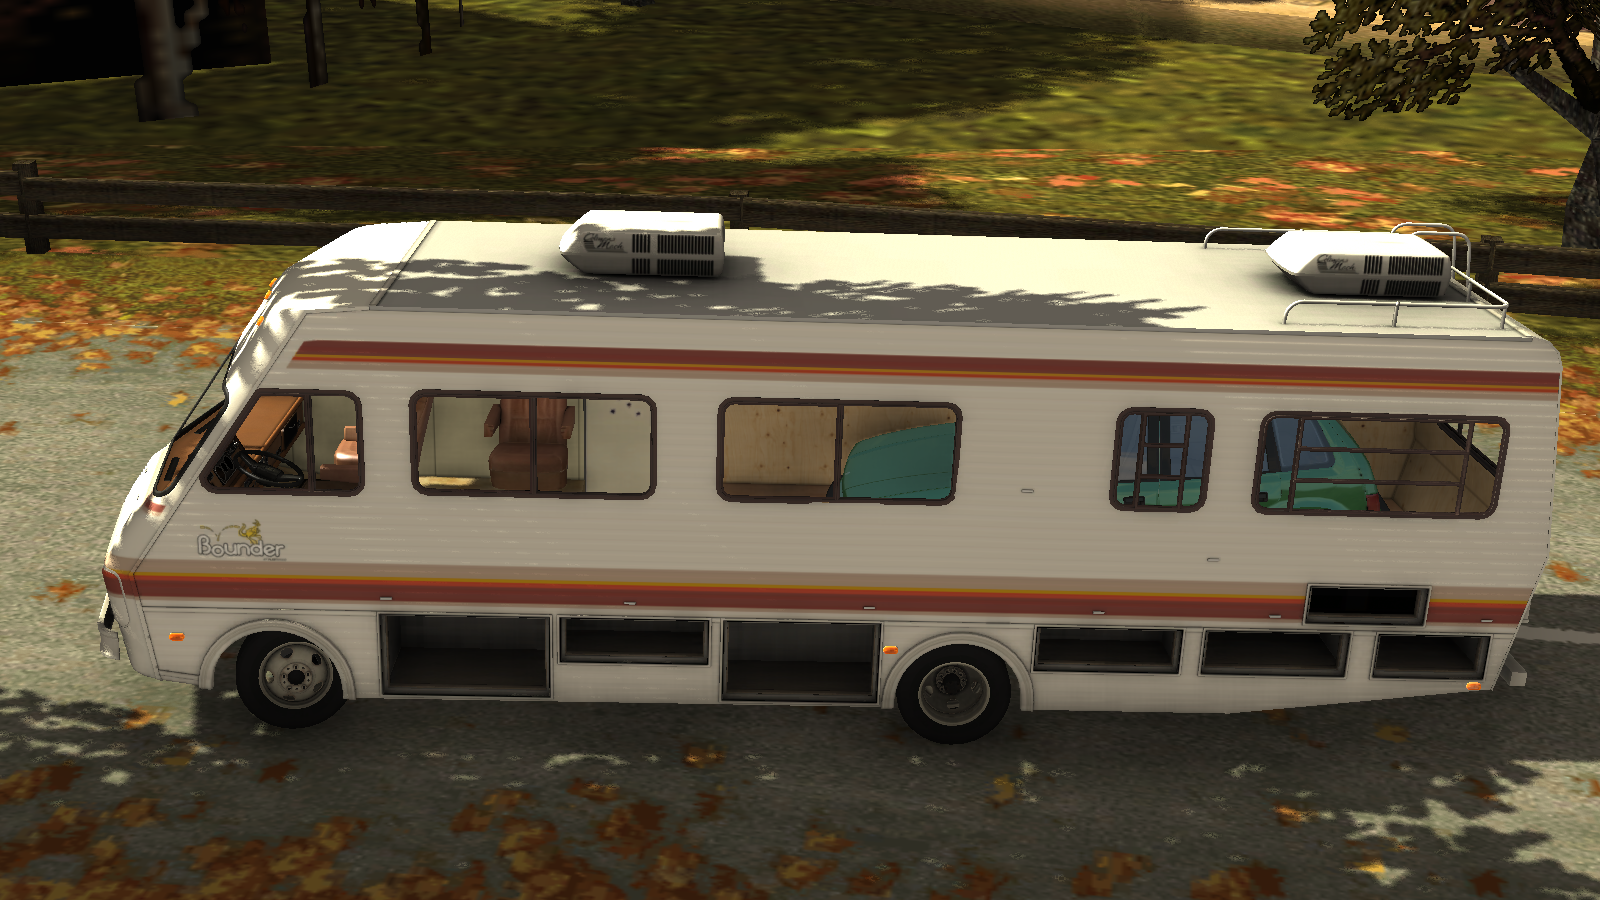 Outdated - 1986 Fleetwood Bounder 31ft RV (Breaking Bad) | Page 3 | BeamNG